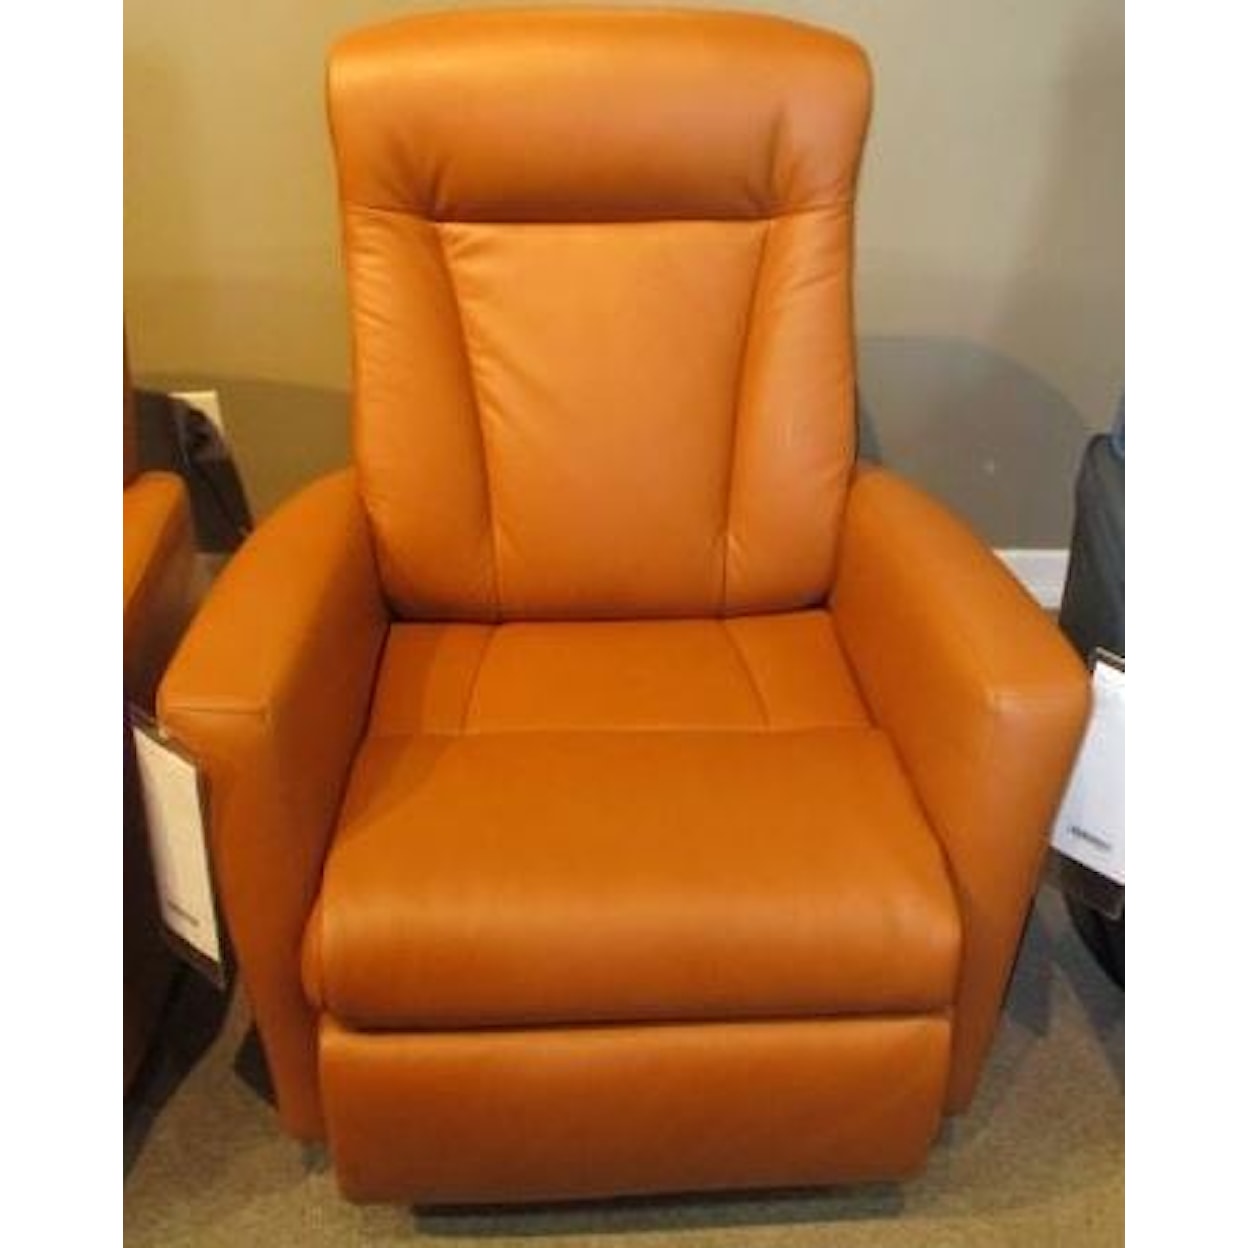 IMG Norway Prince  Large Recliner